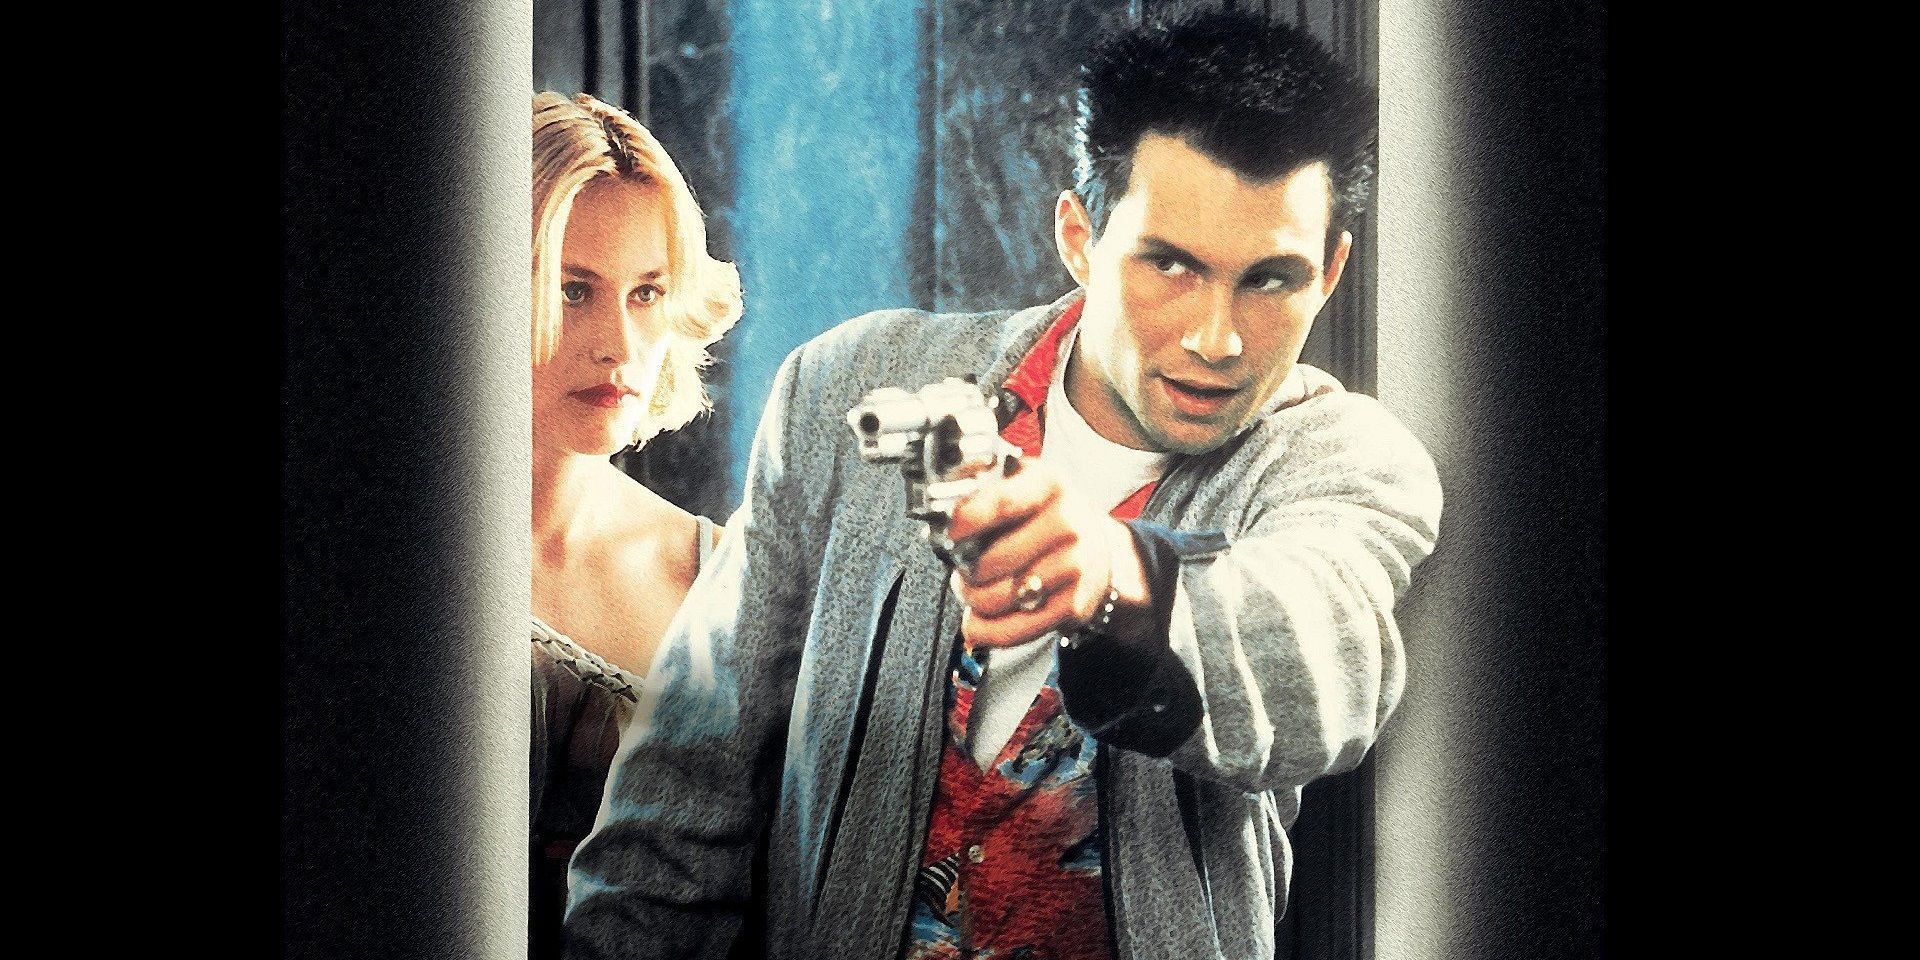 Christian_Slater_and_Patricia_Arquette_on_the_poster_for_True_Romance